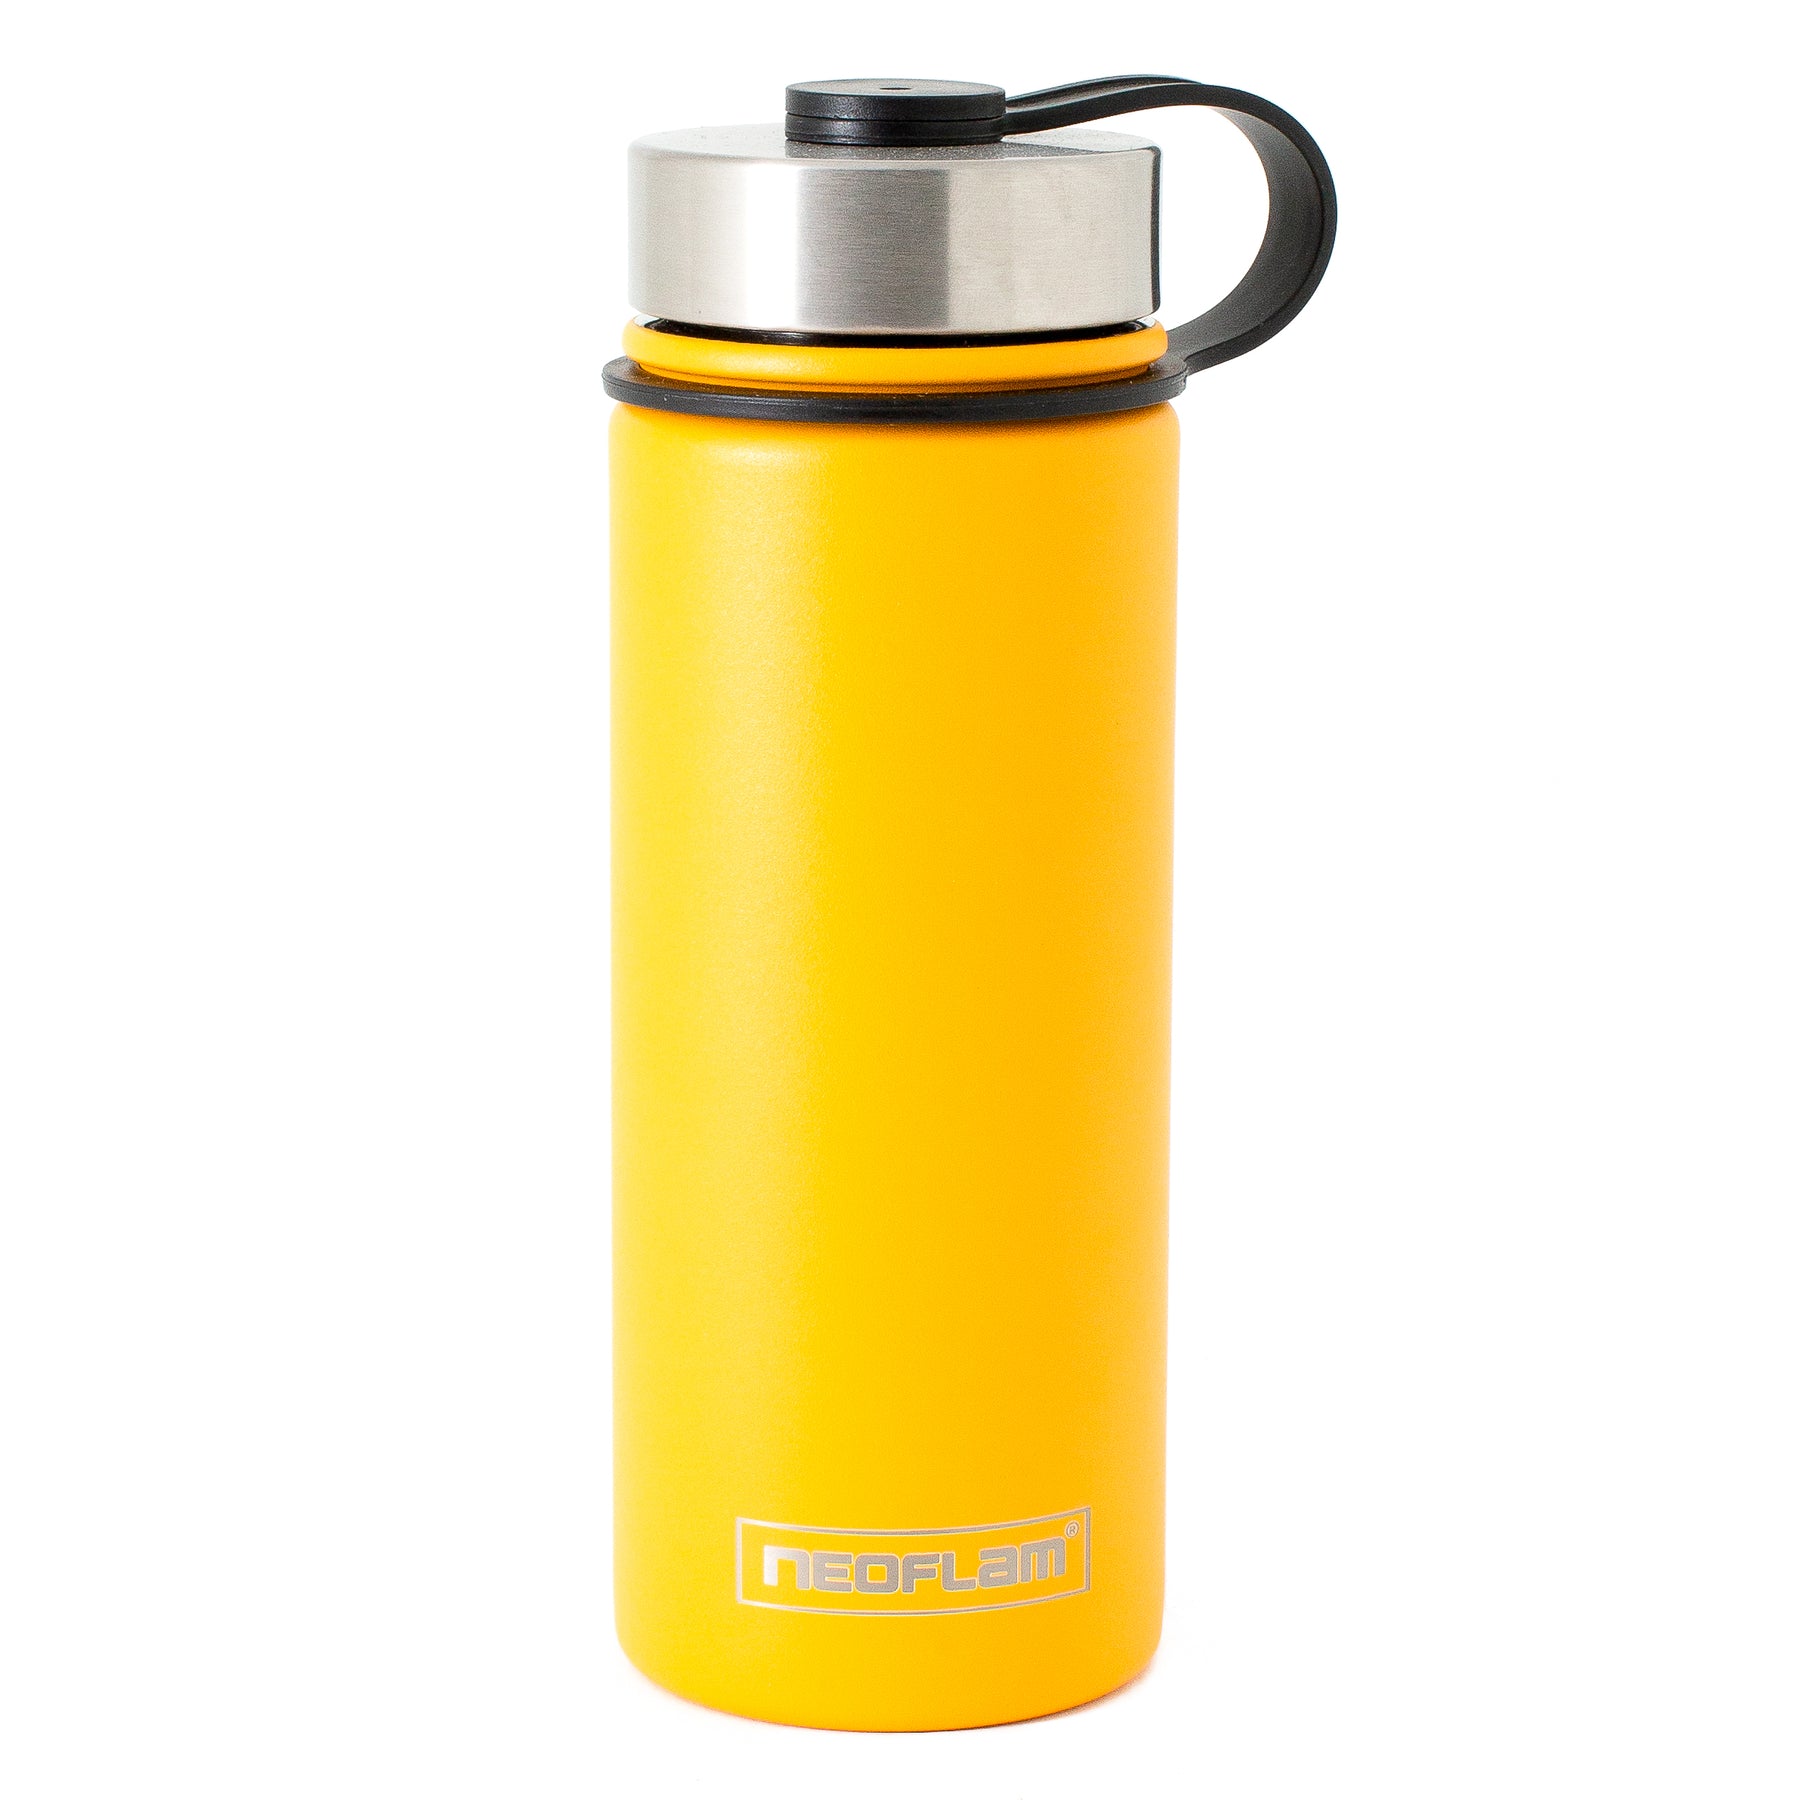 Neoflam All Day 1.2L/1.9L and Skinny 750ml/500ml Stainless Steel Water Bottle Lid